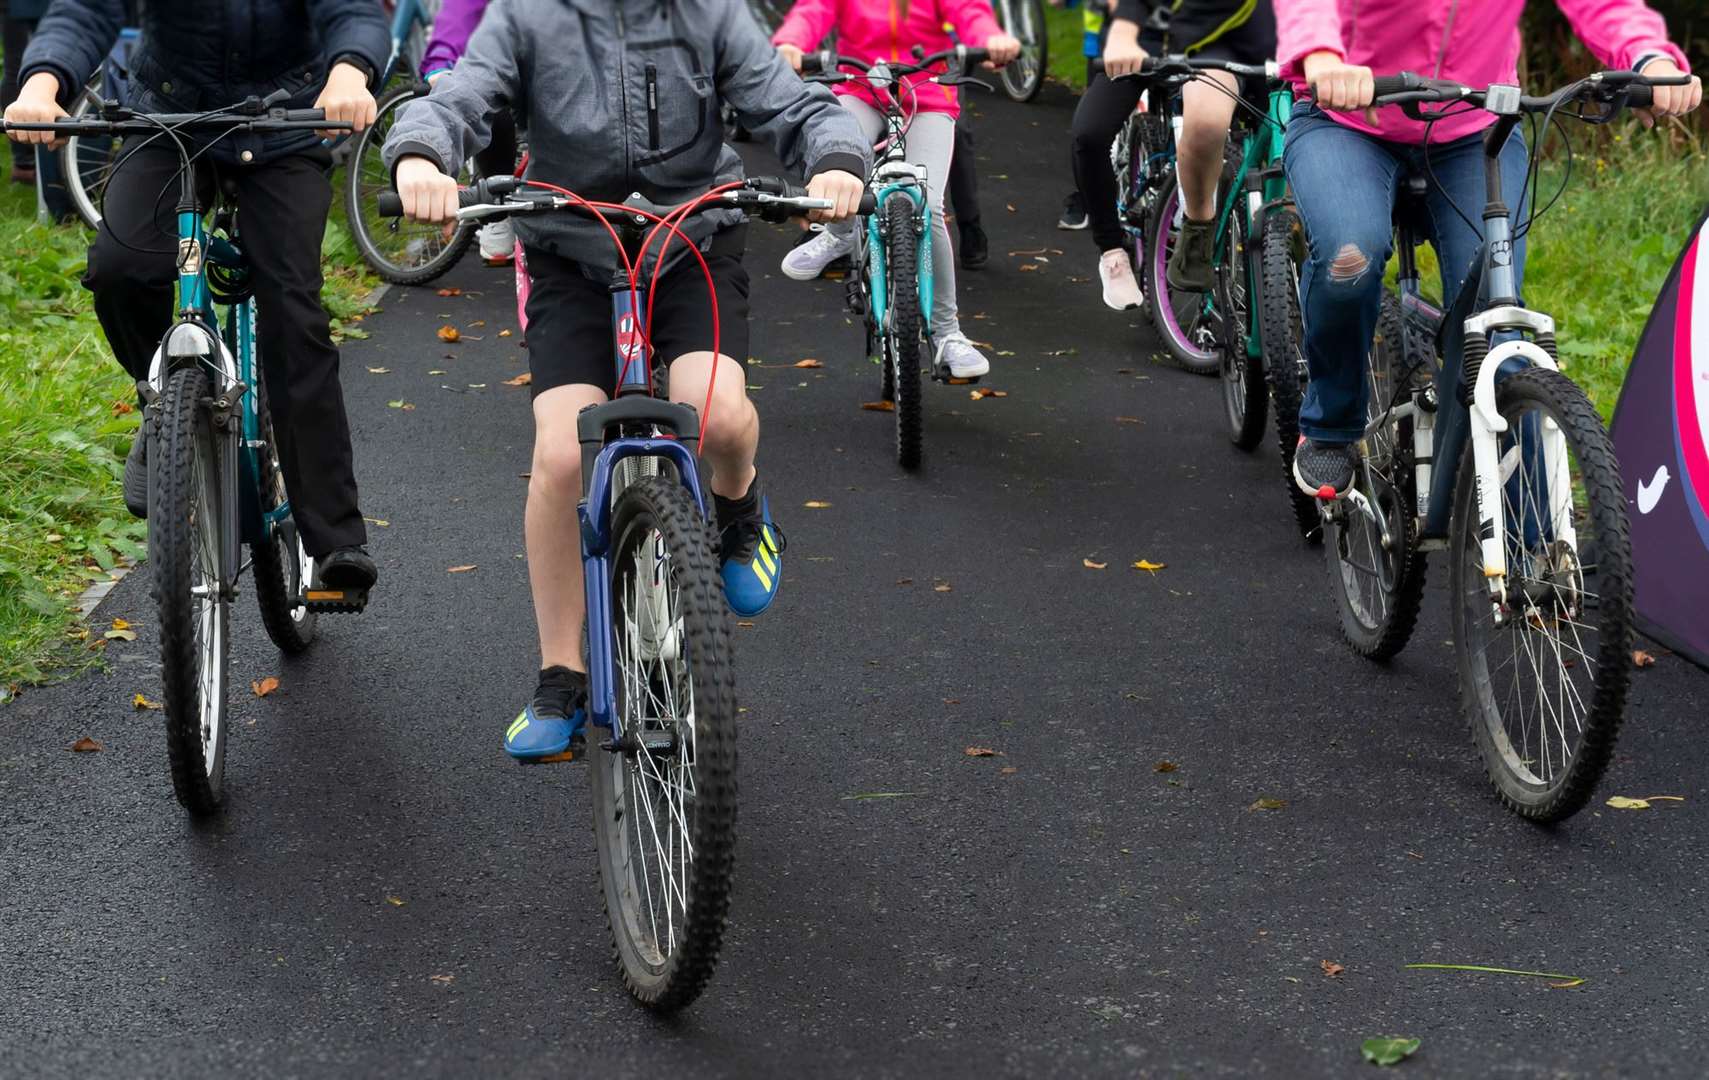 Cycling safely is more important than ever